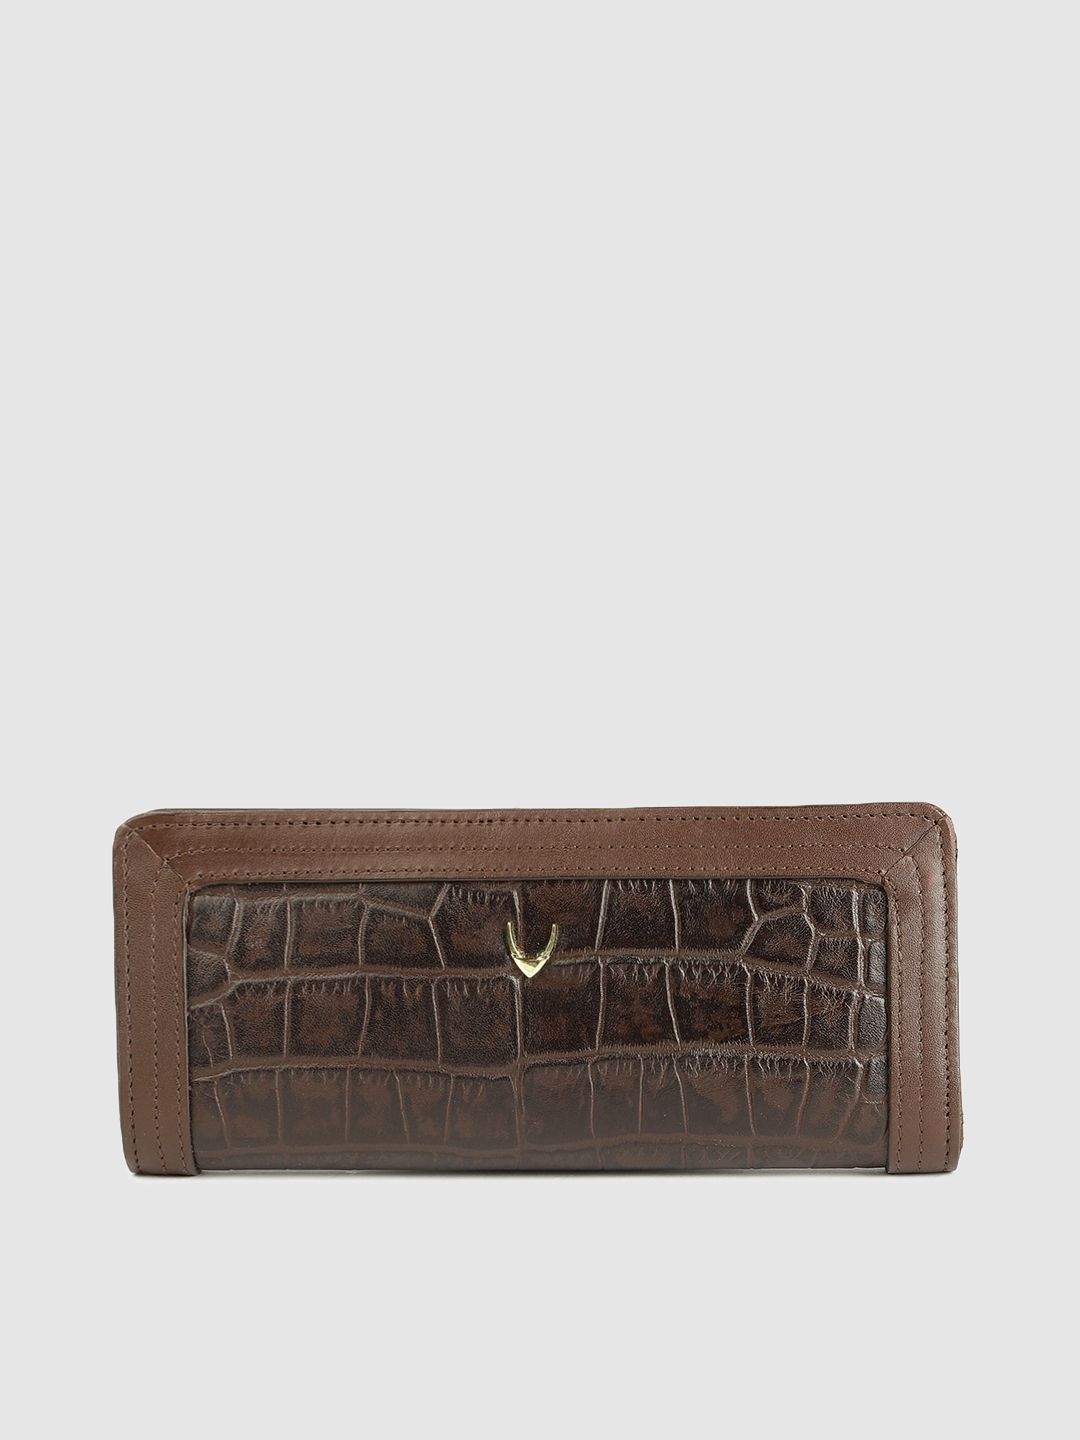 Hidesign Women Brown Textured Leather Envelope Price in India